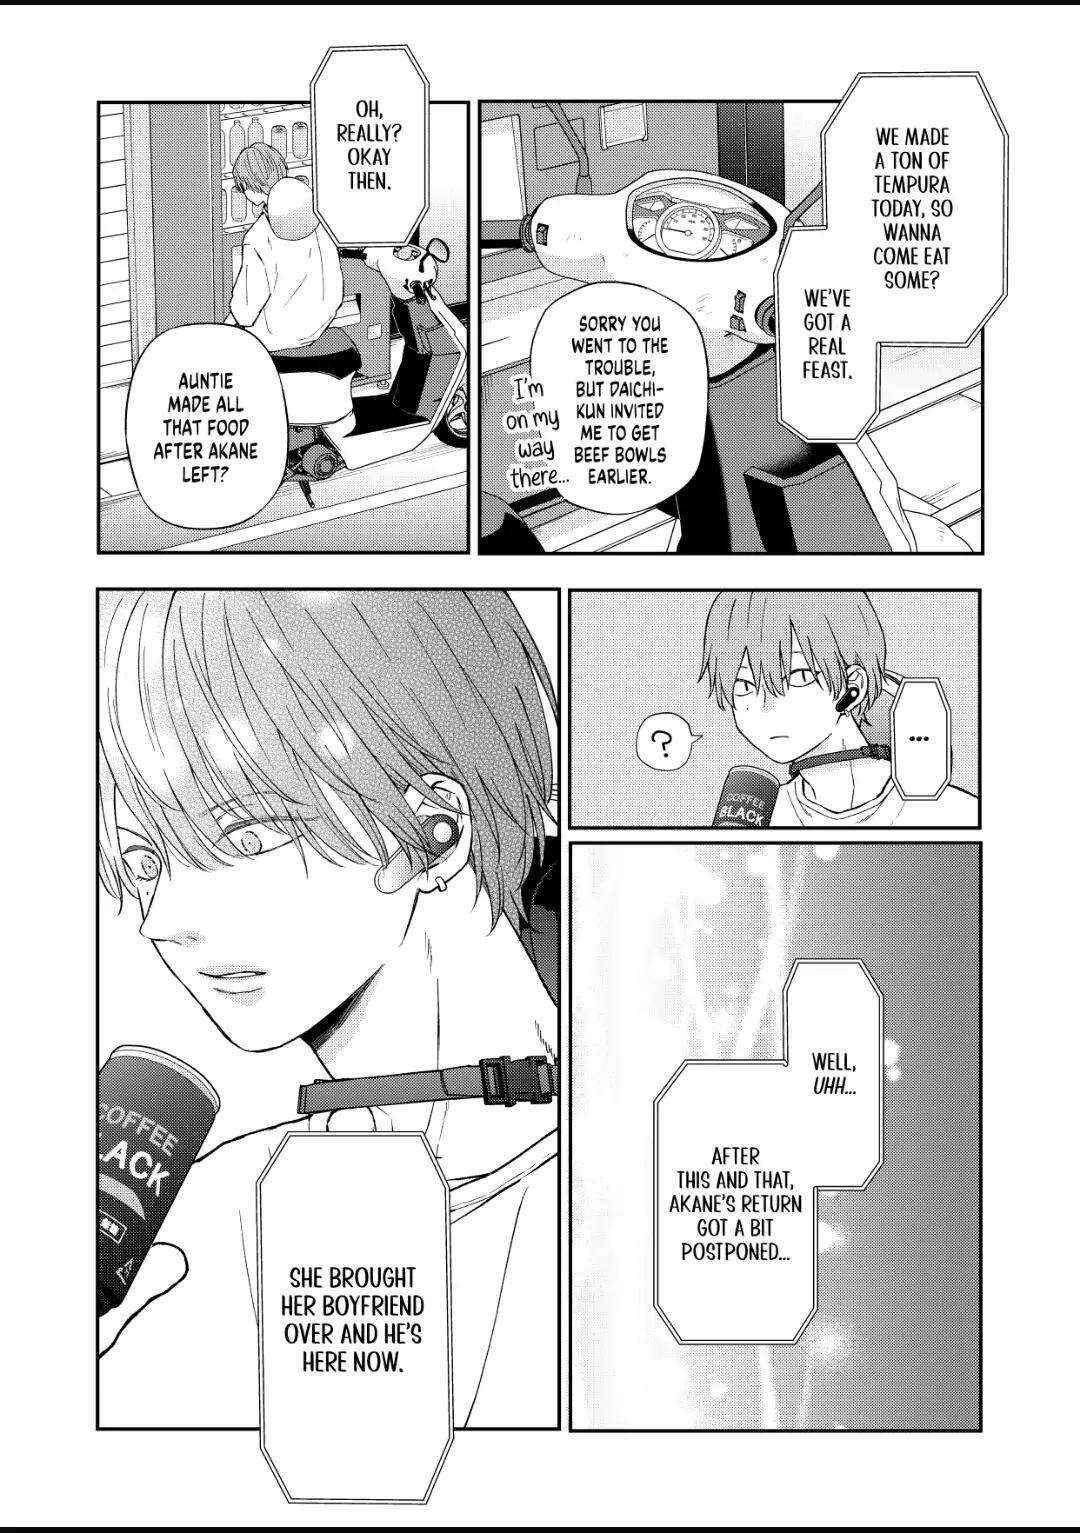 Chapter 101, My Love Story with Yamada-kun at Lv999